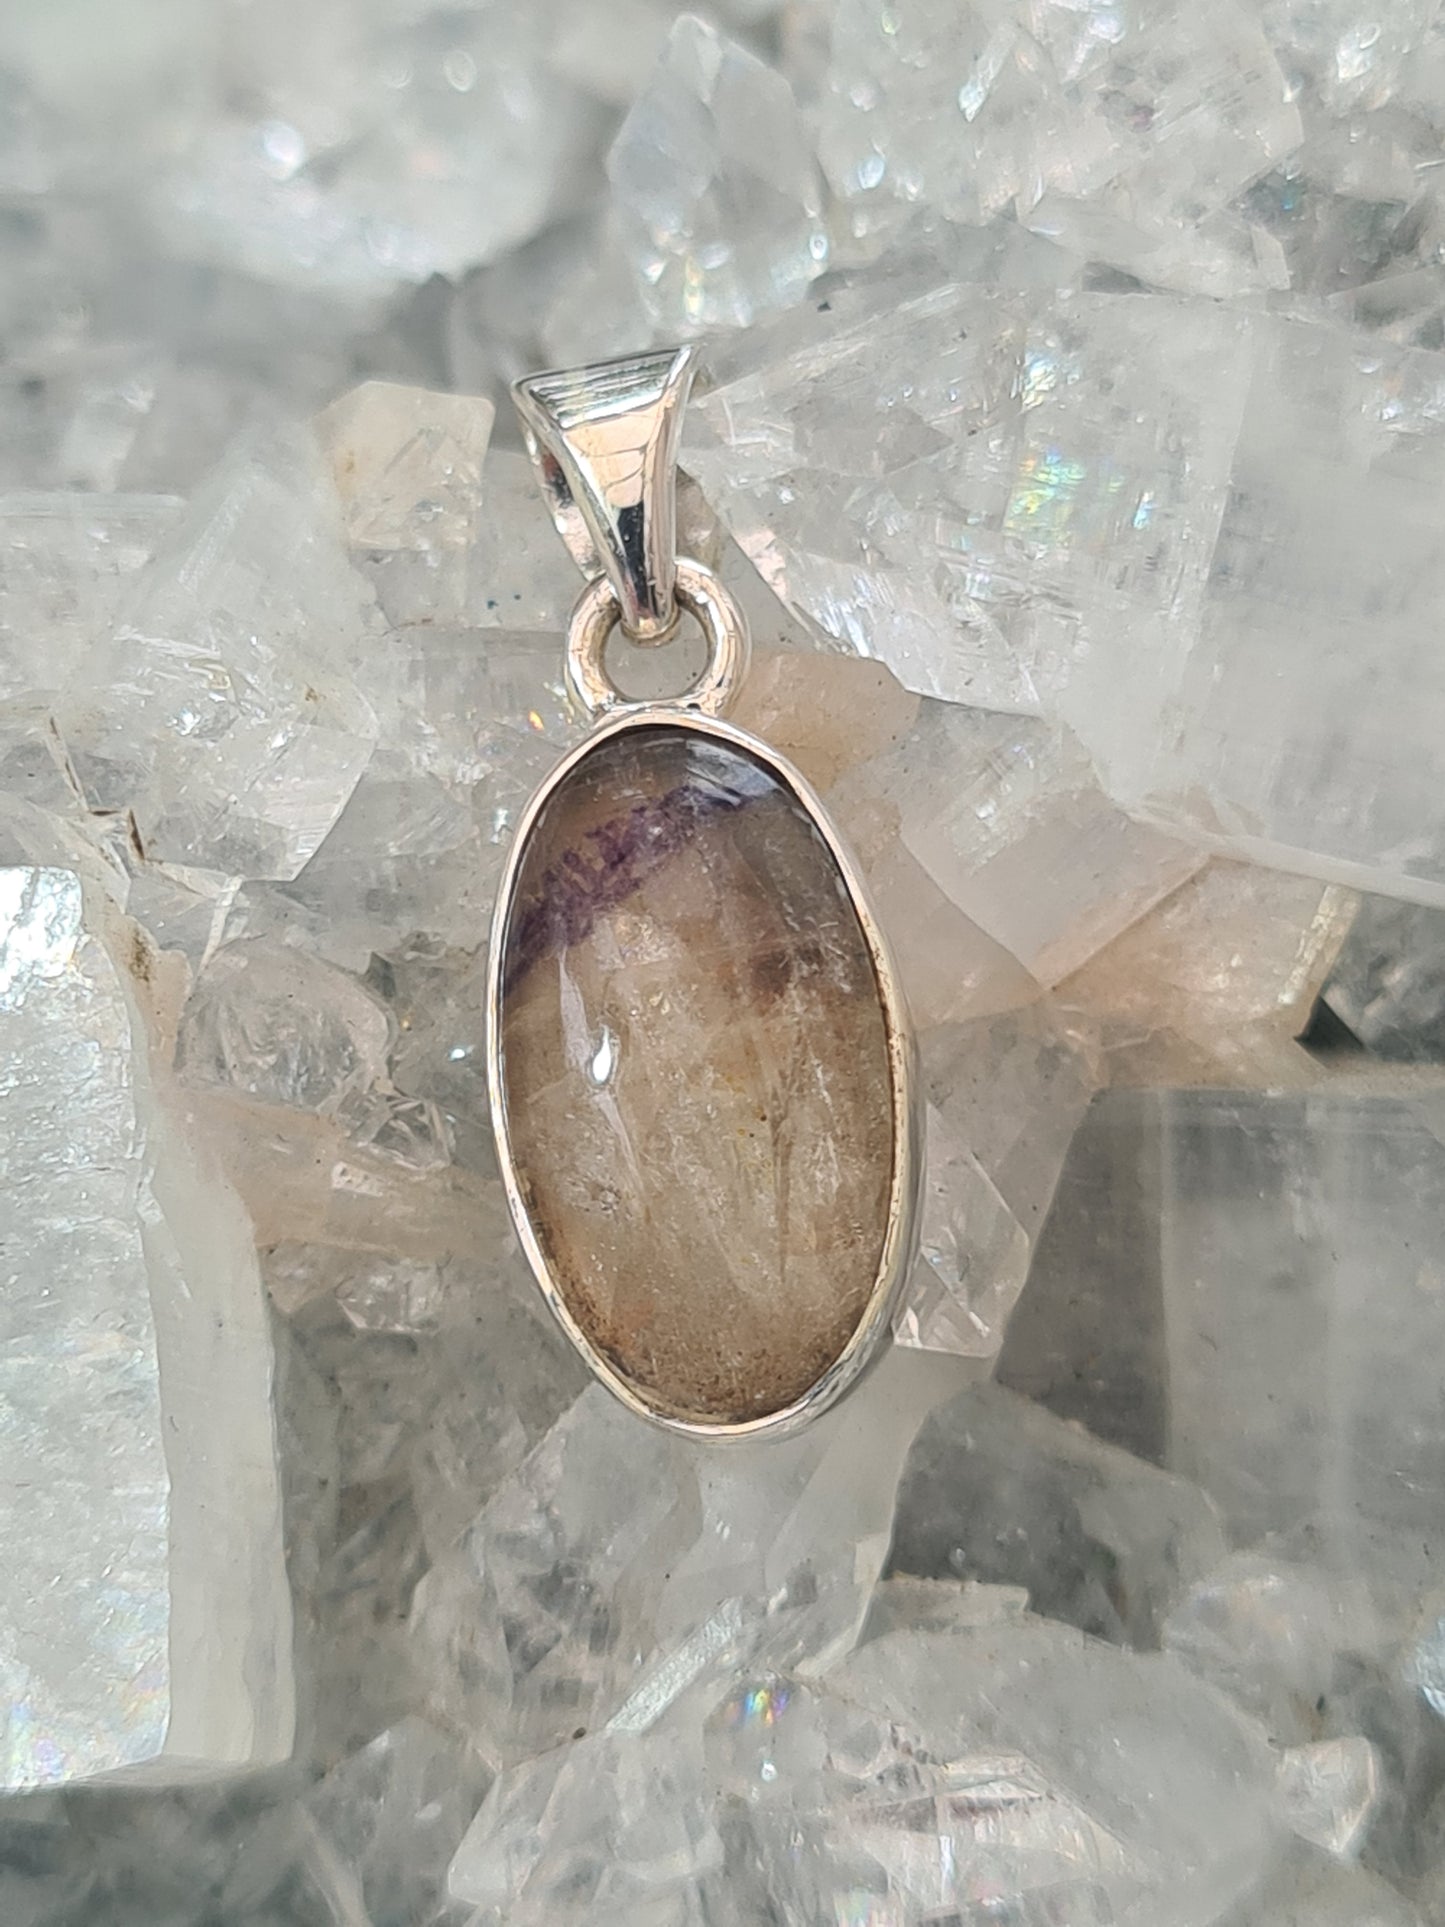 Natural Derbyshire Blue John Fluorite Pendant in Sterling Silver. Oval shape with purple banding.